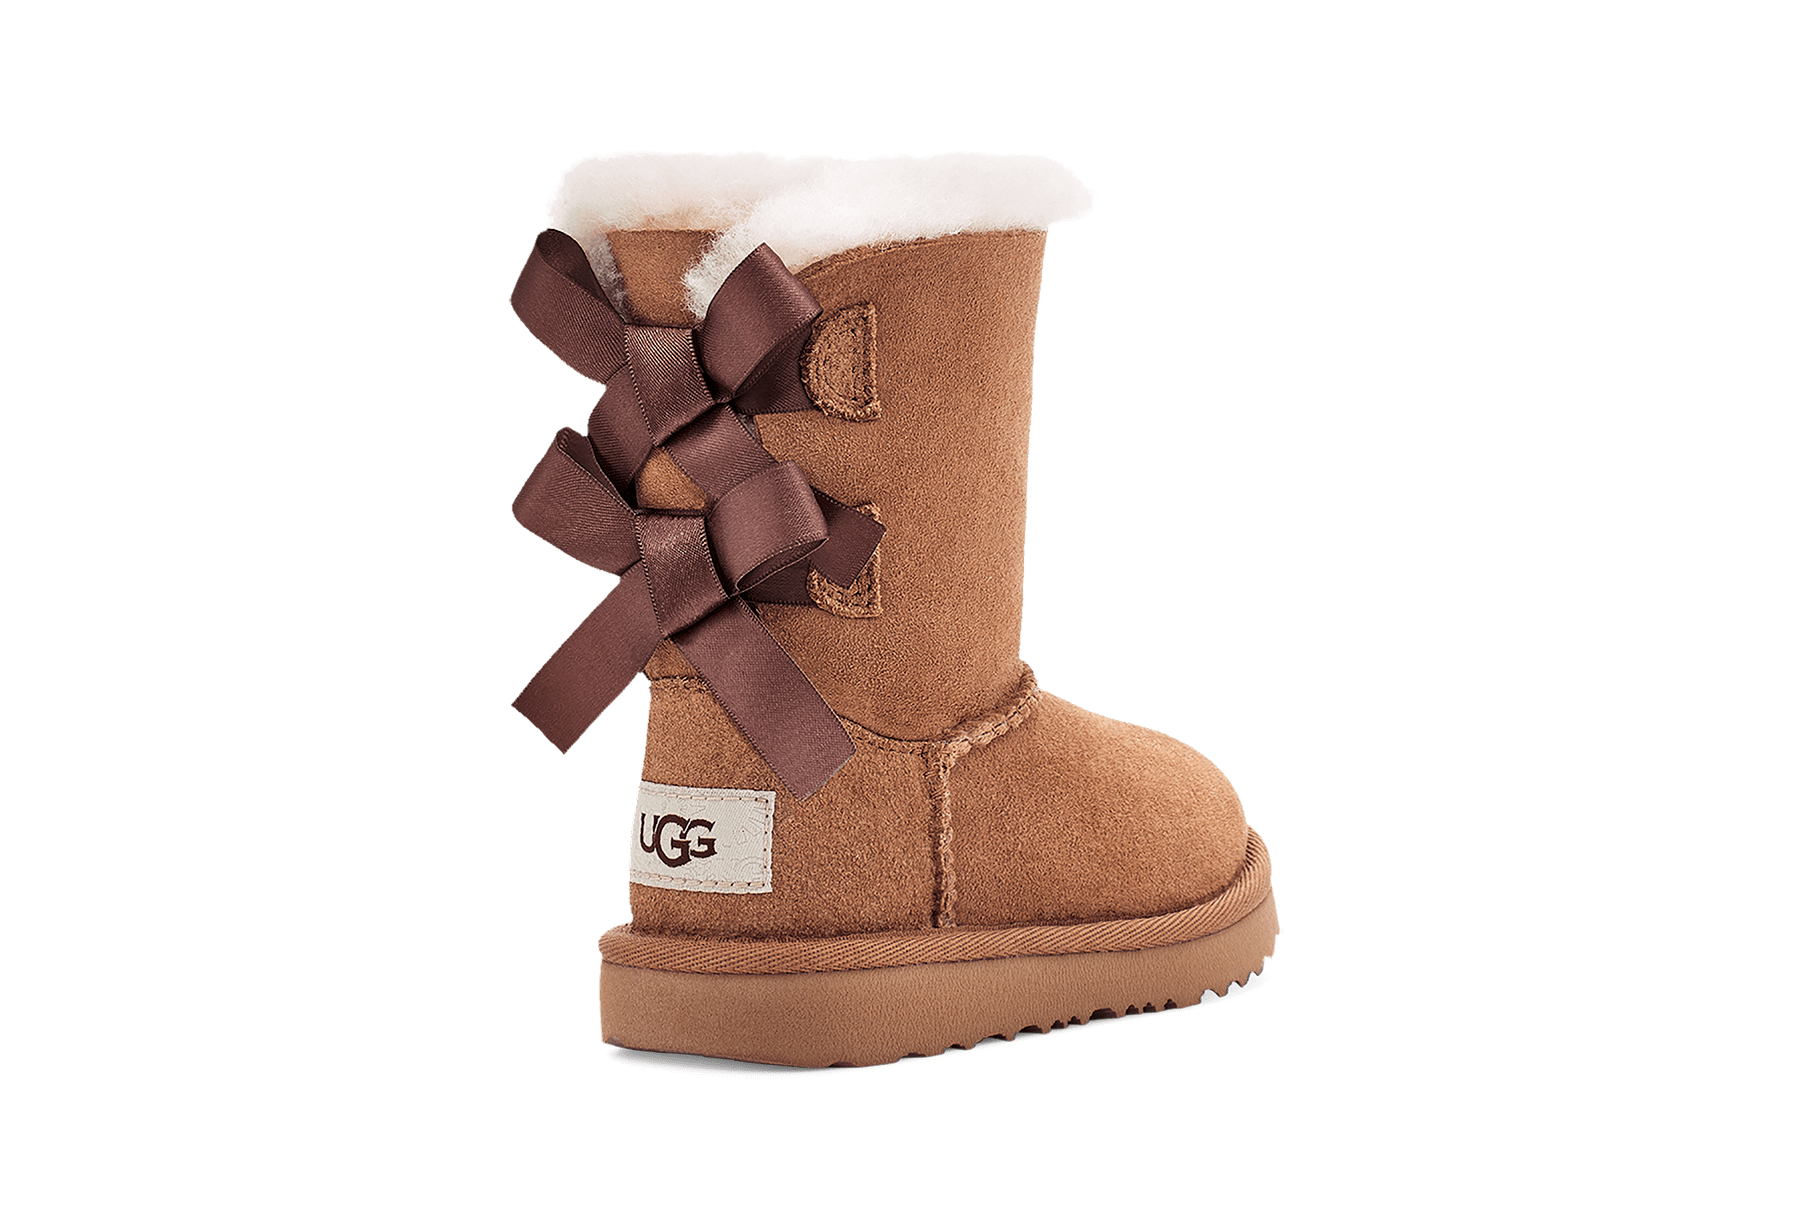 UGGs with UGGPure Lining Shedding Issues